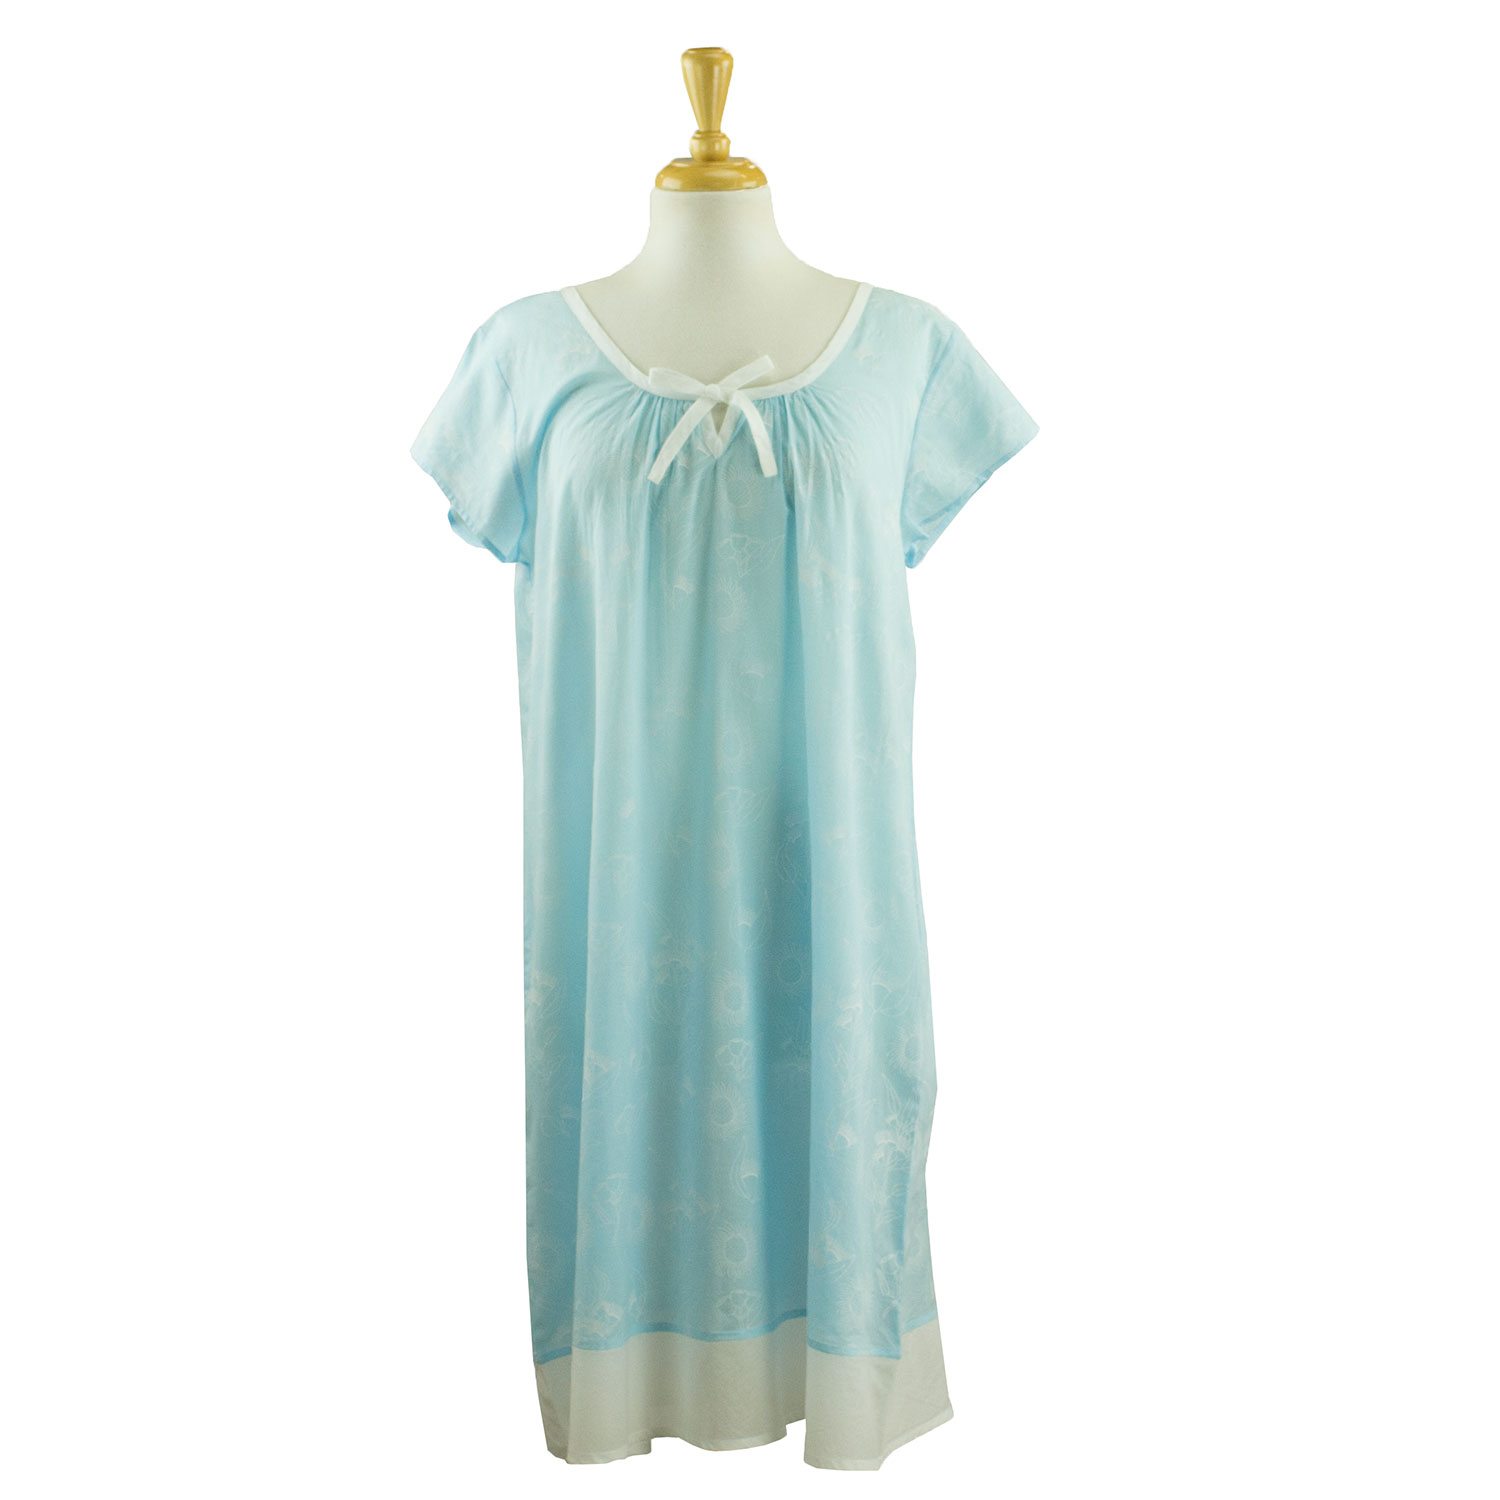 French Country Sleepwear | 100% Cotton French Country Pyjamas Online